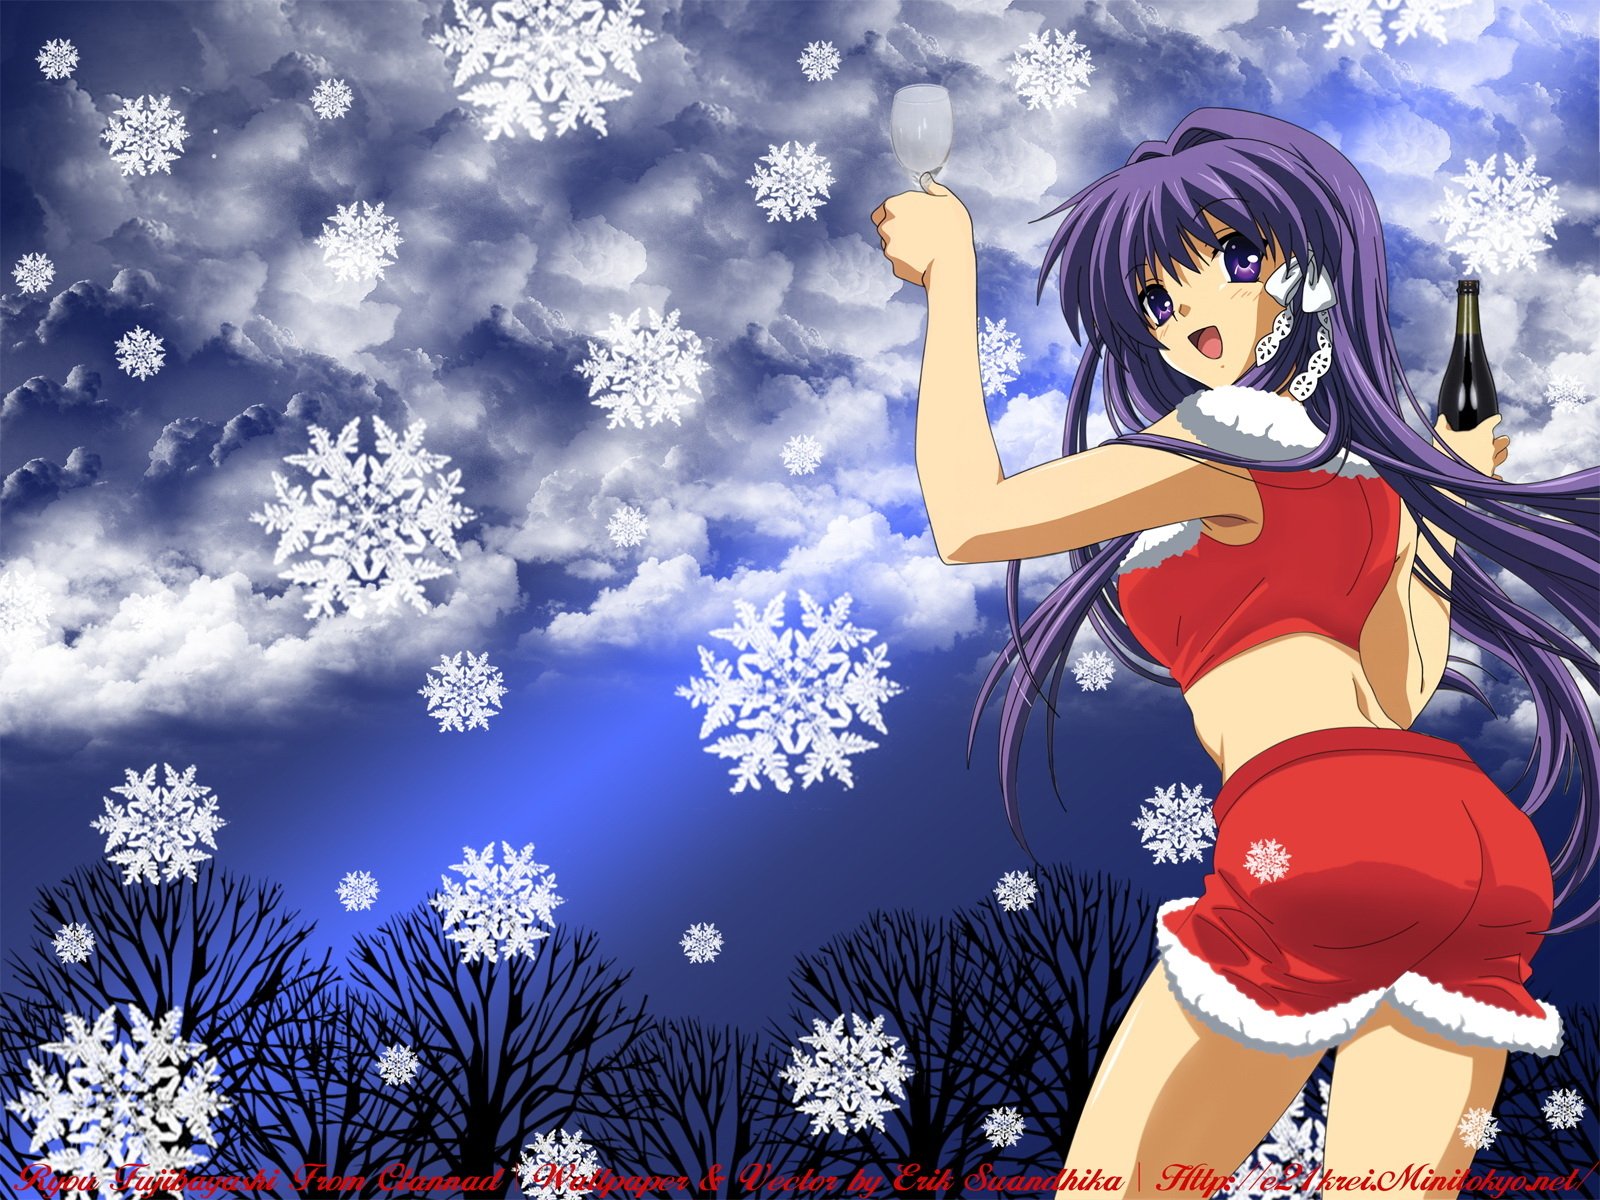 Clannad 壁纸and 背景 1600x10 Id Wallpaper Abyss